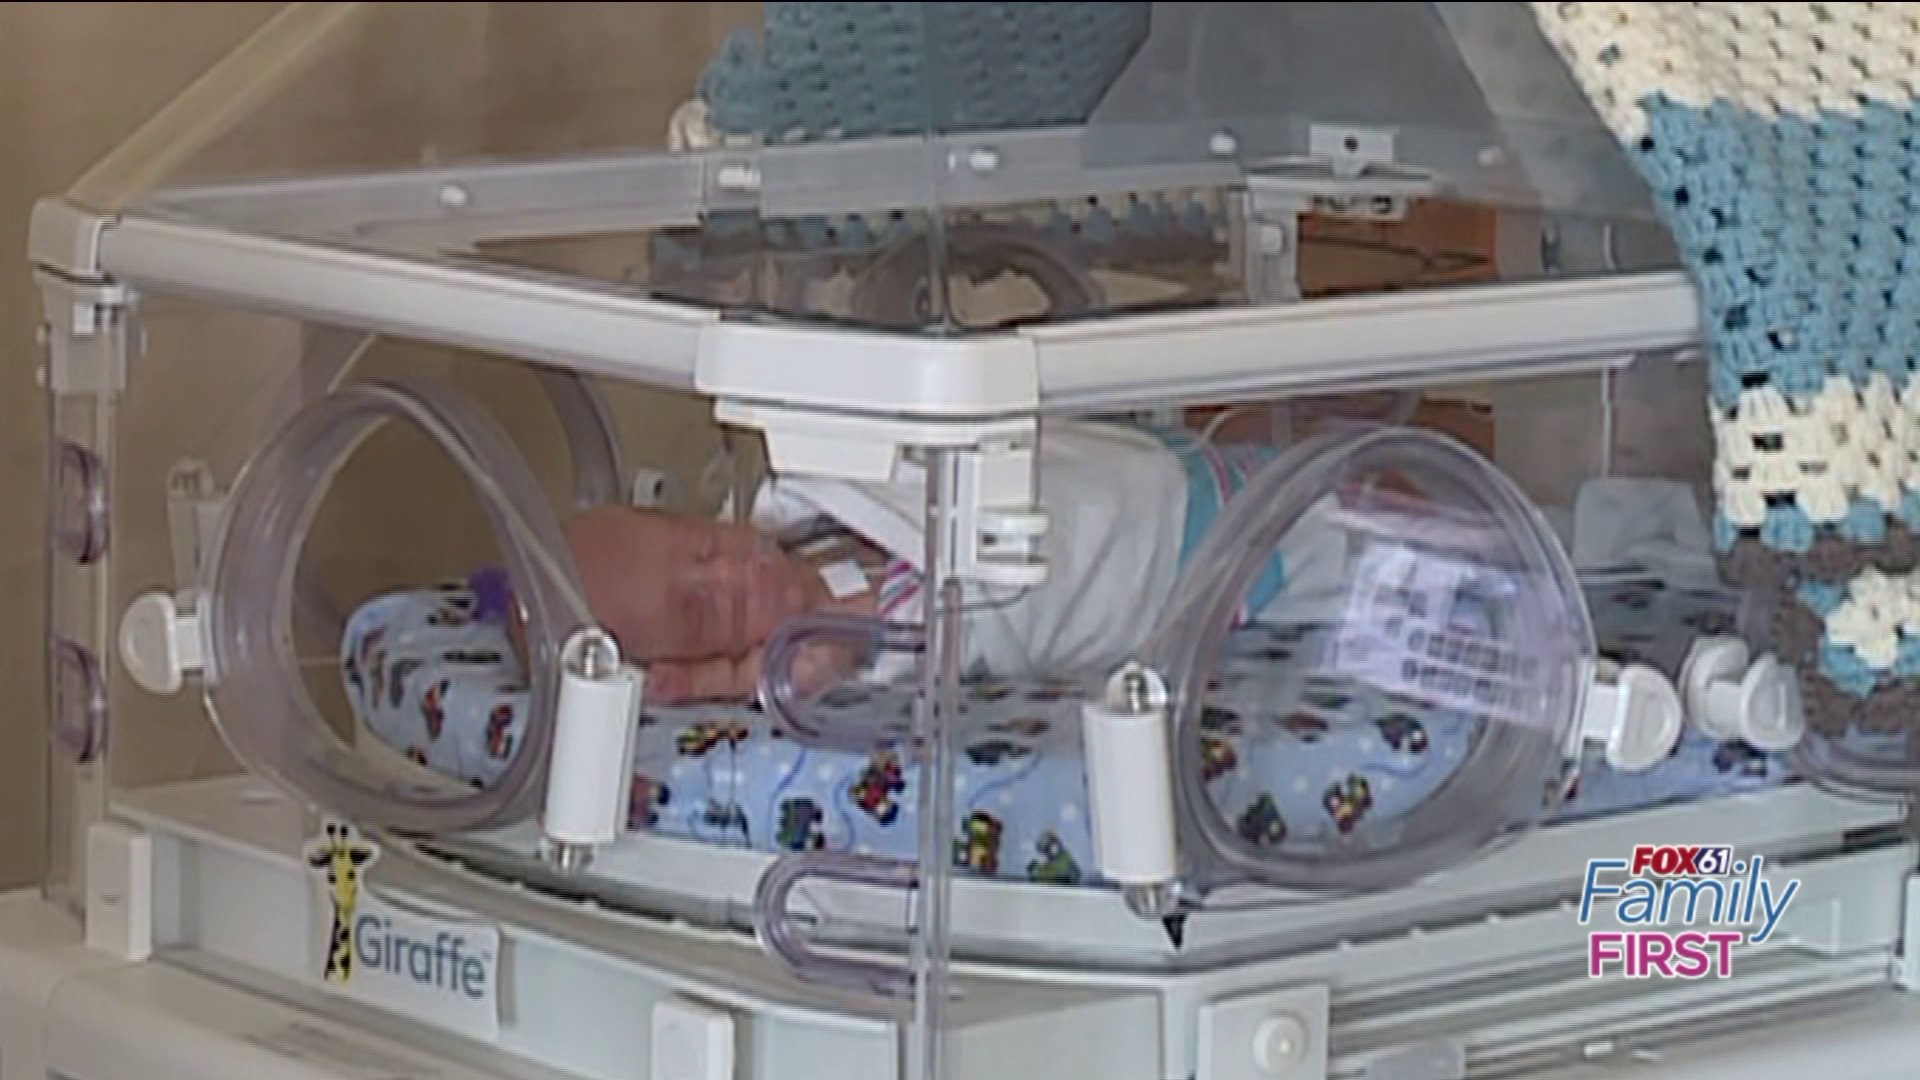 Family First: New neonatal wing at Yale-New Haven Hospital